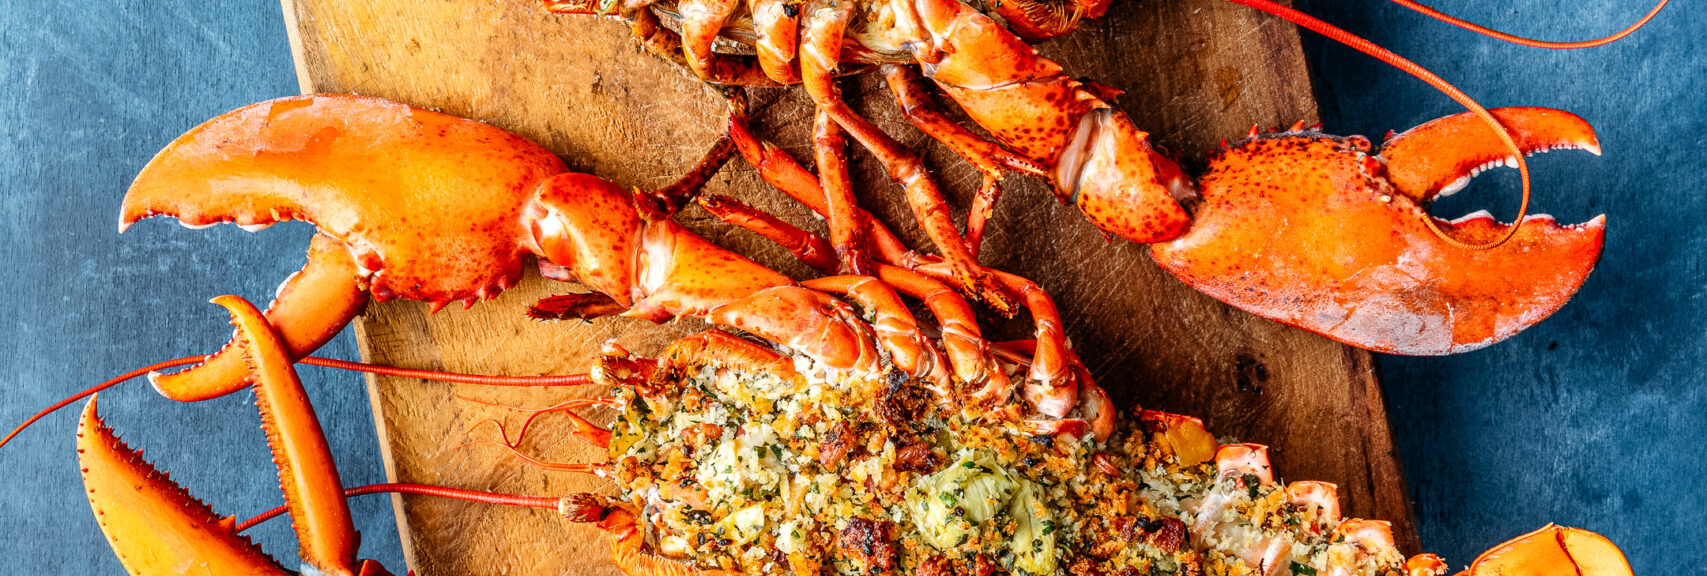 Whole Stuffed Maine Lobster with Herby Artichoke Pancetta Bread Crumbs recipe image